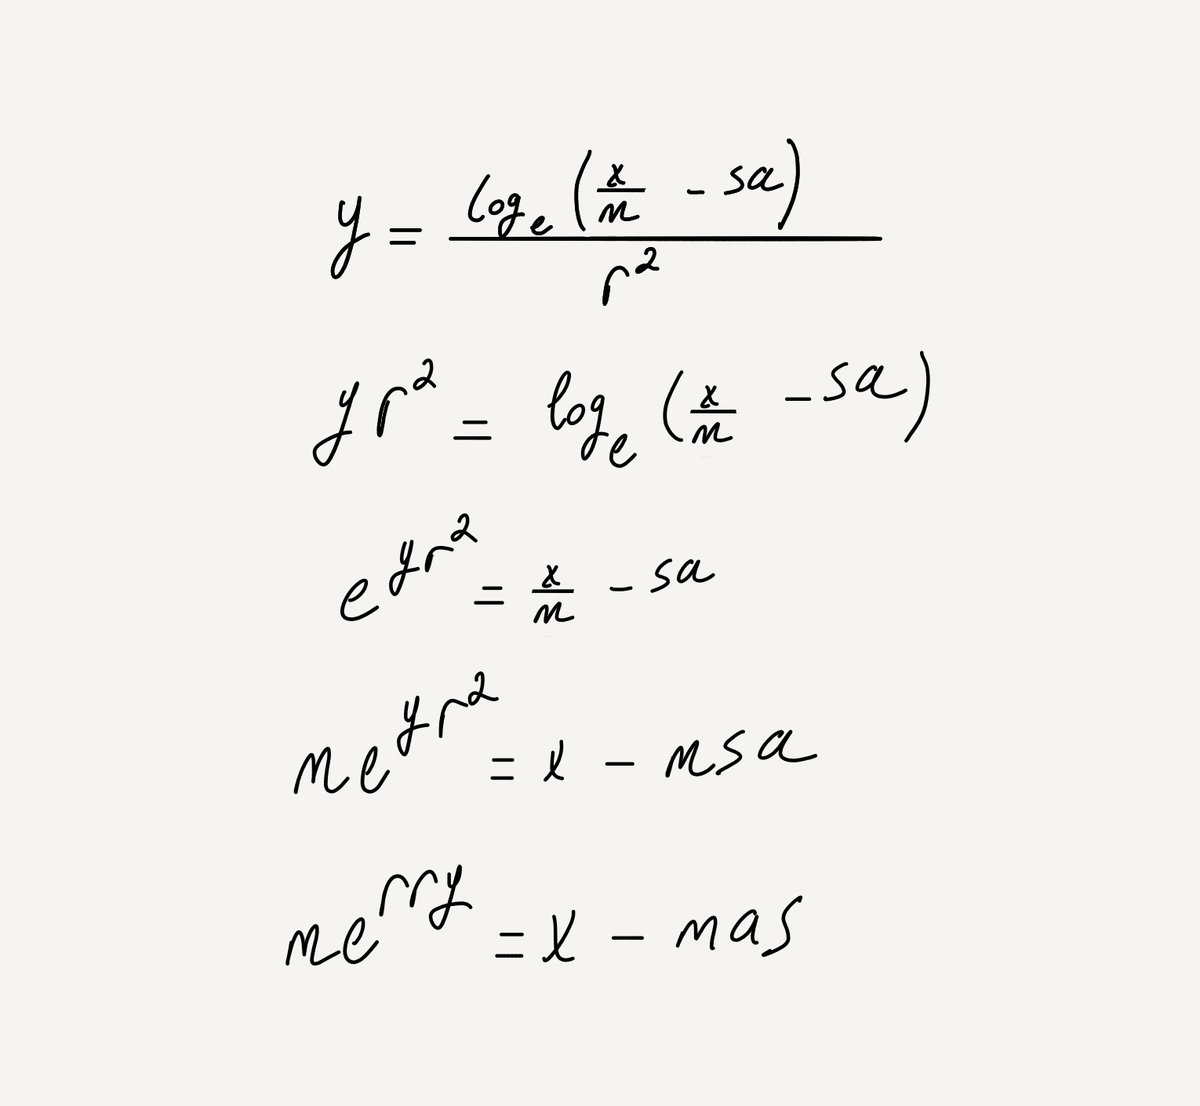 Merry Christmas to all math people! 🎄